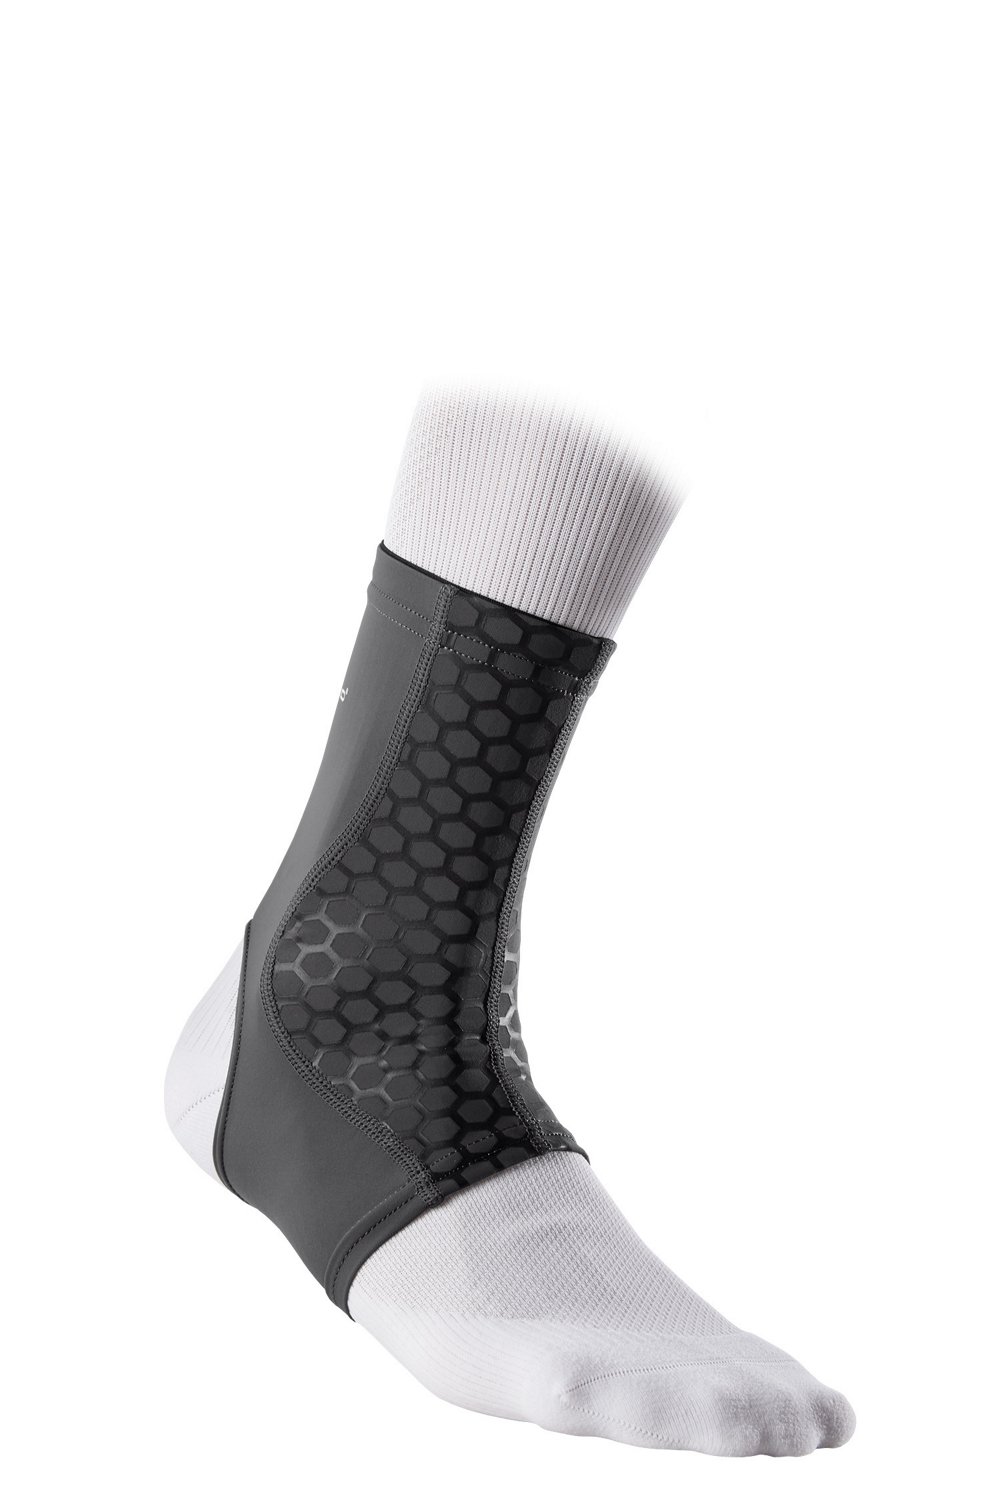 McDavid Active Comfort Compression Ankle Sleeve | Academy